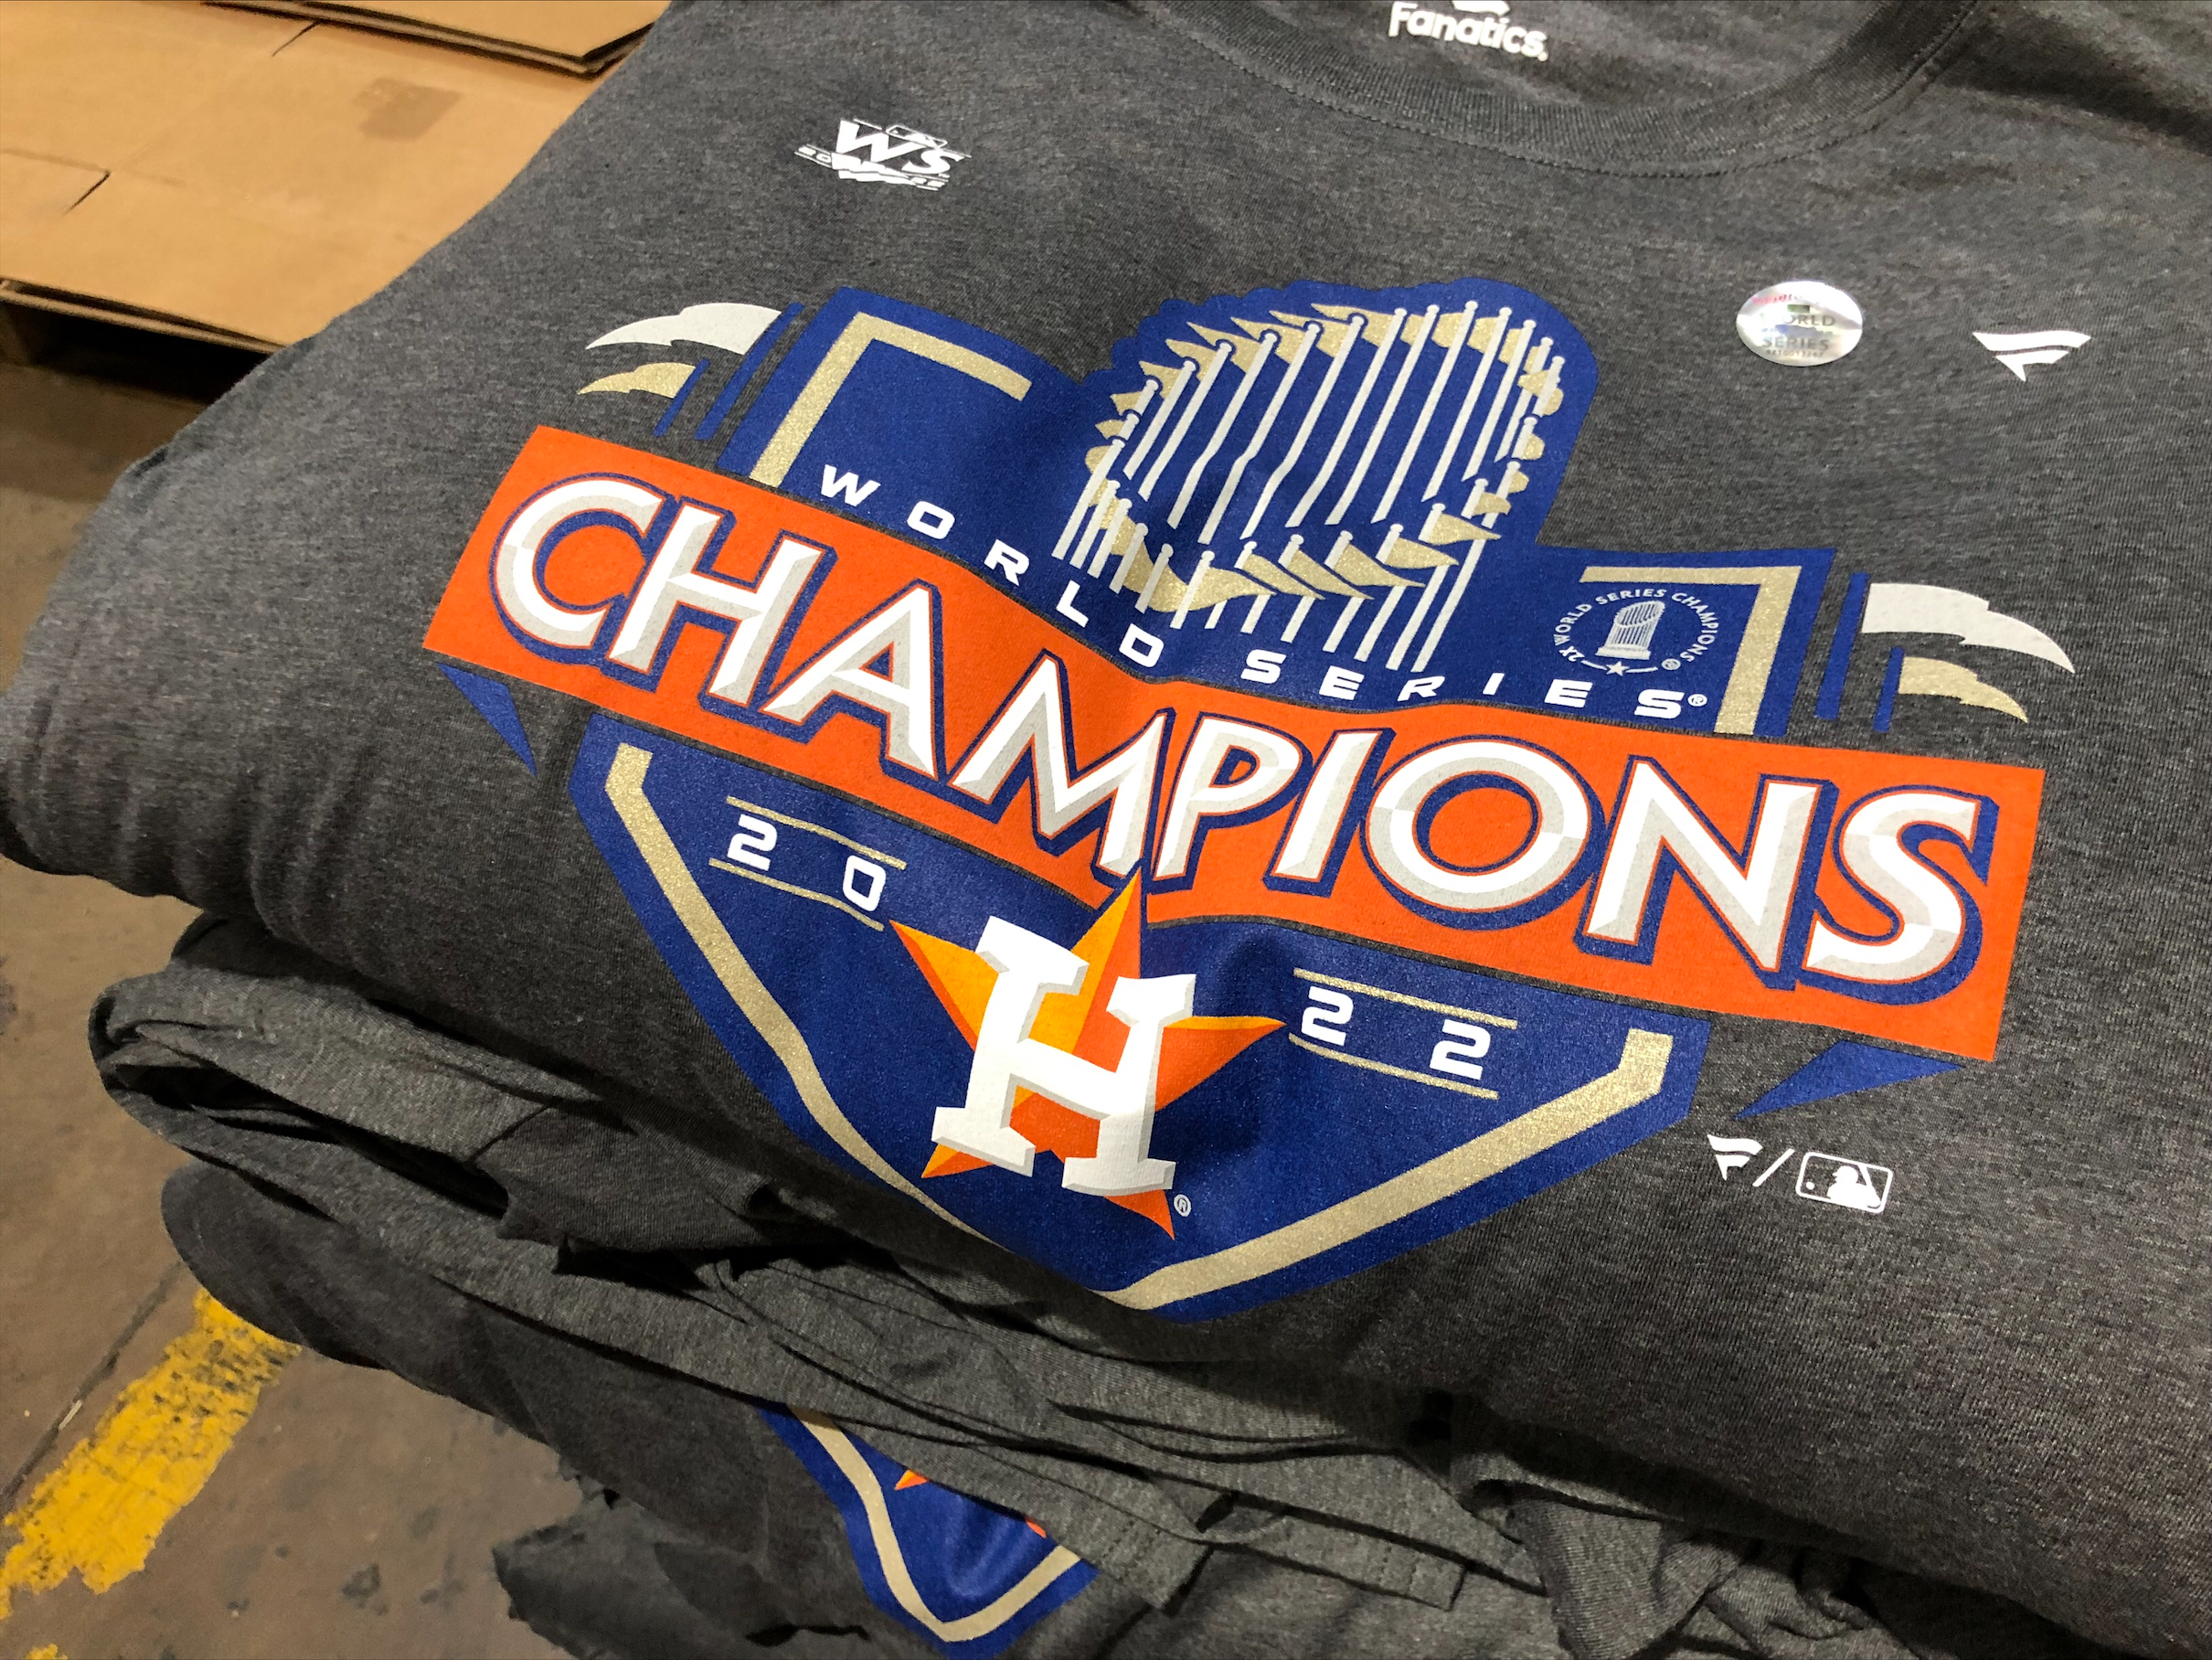 official astros world series shirts